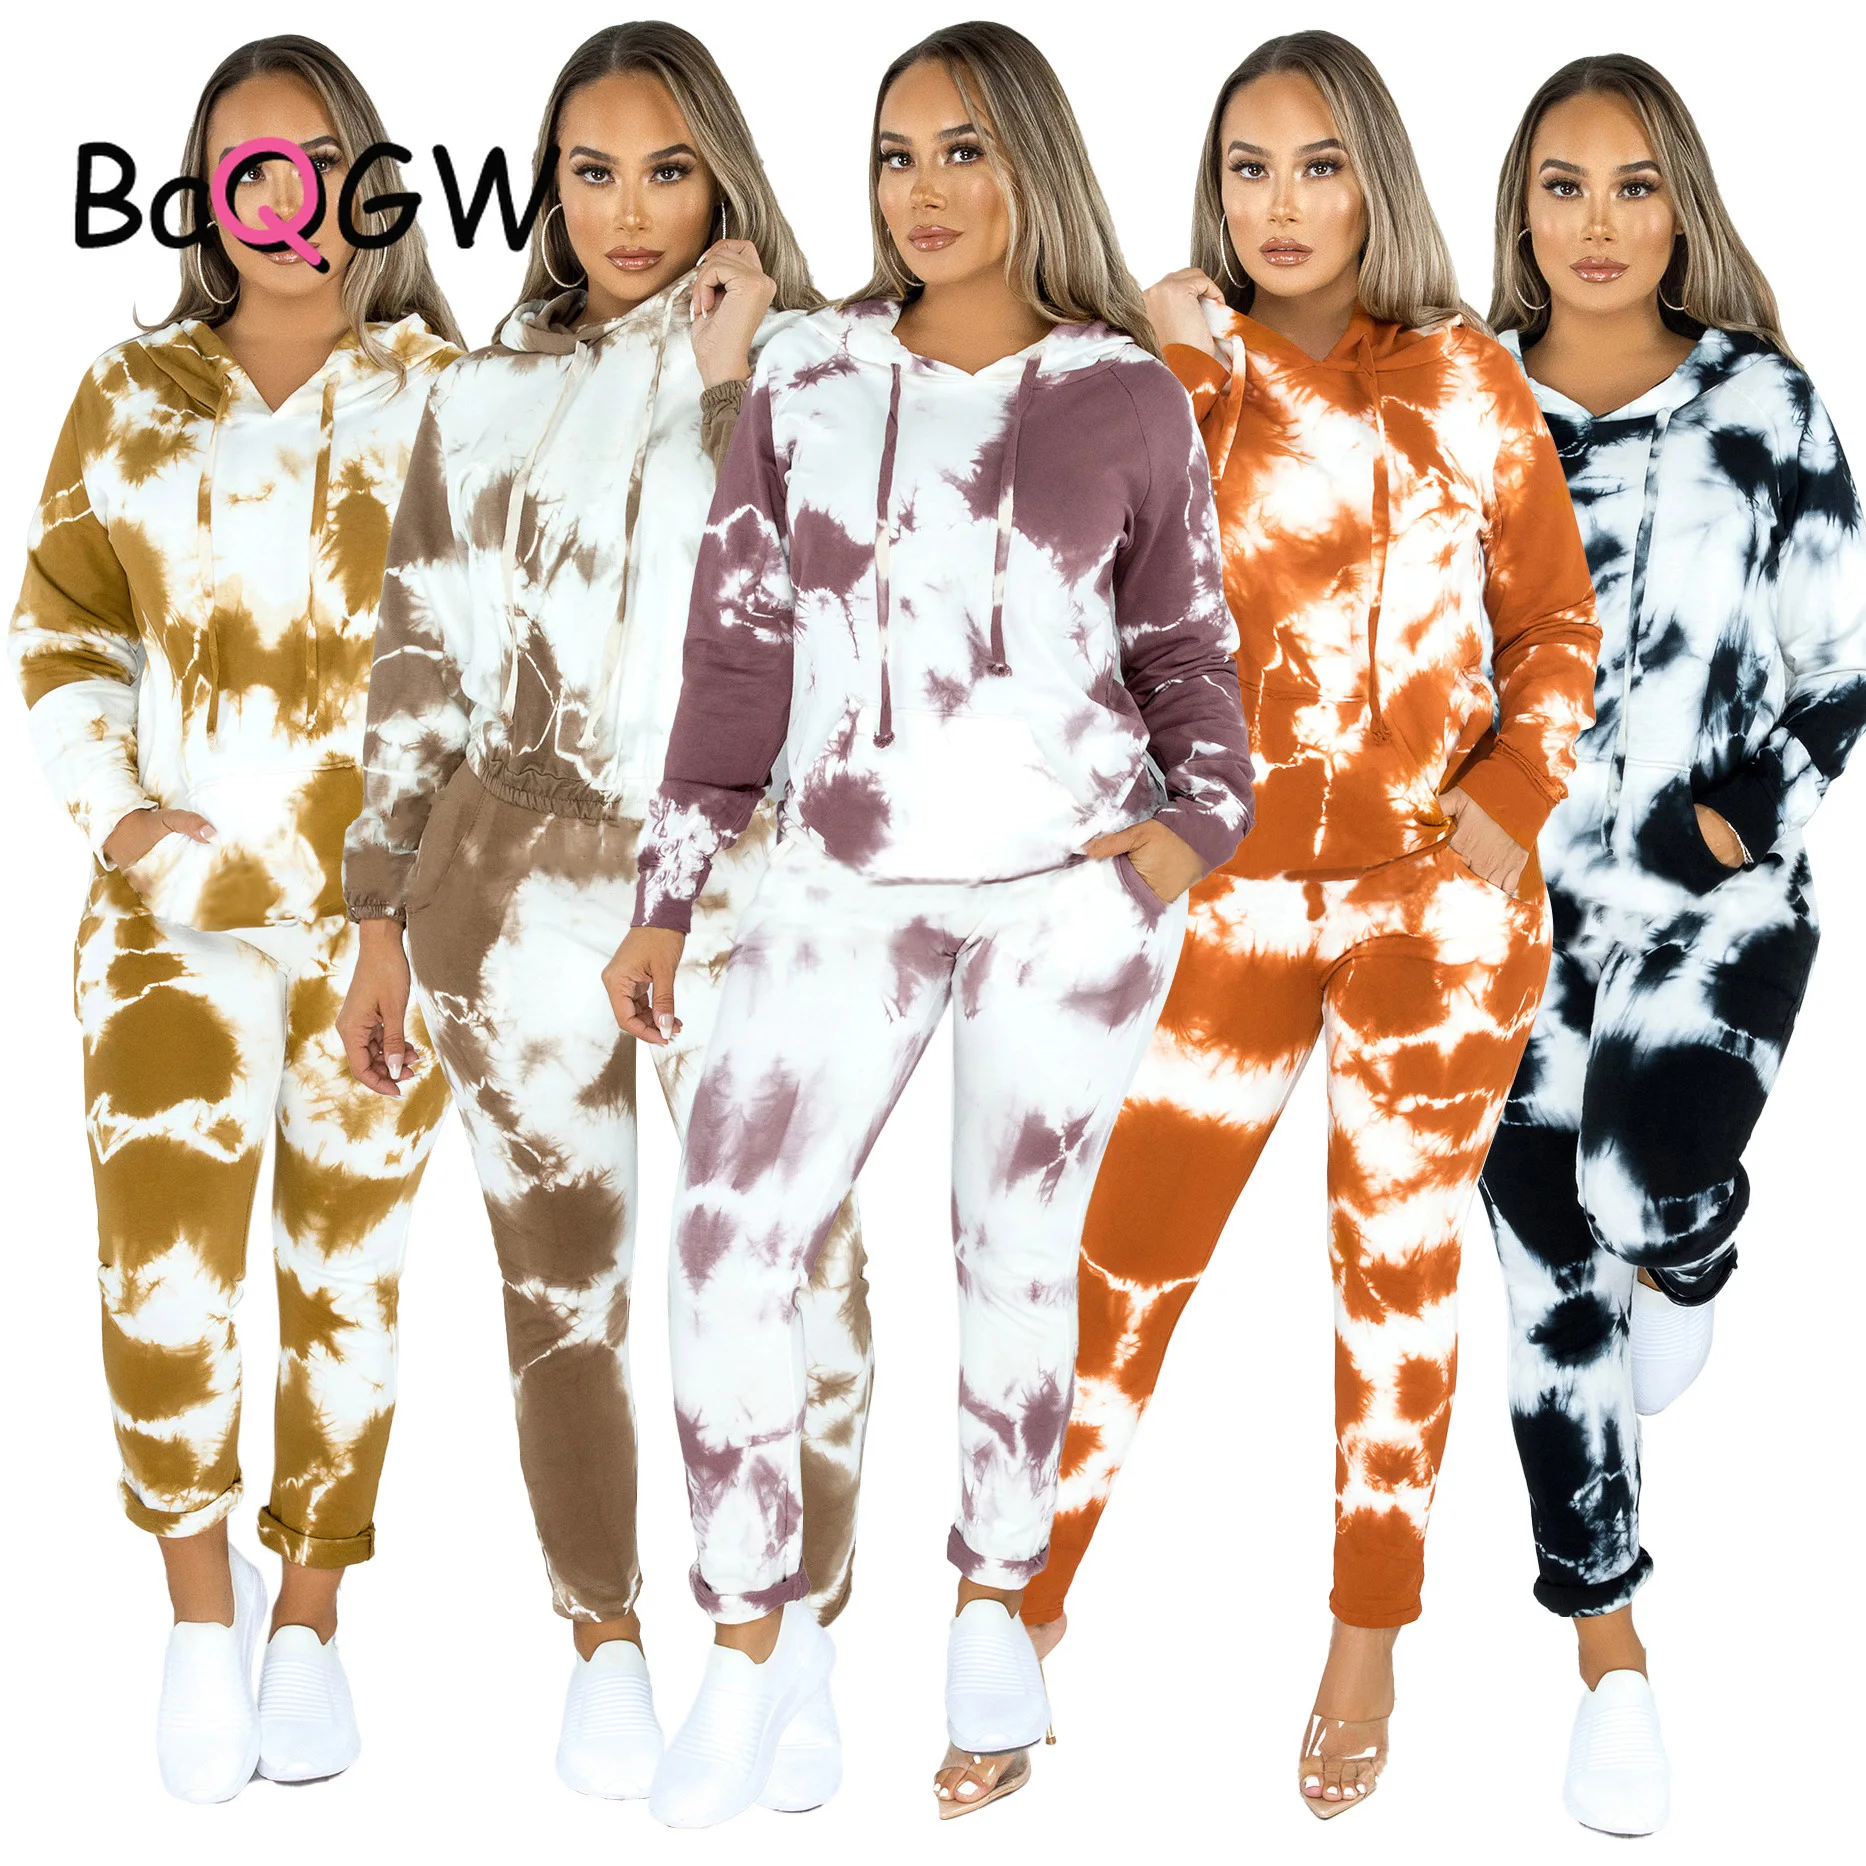 

BaQGW Tie Dye Print Casual Long Sleeve Co-ord Sets Women Hooded Sweatshirt and Pants Party Loose Homewear Two Piece Set Outfit